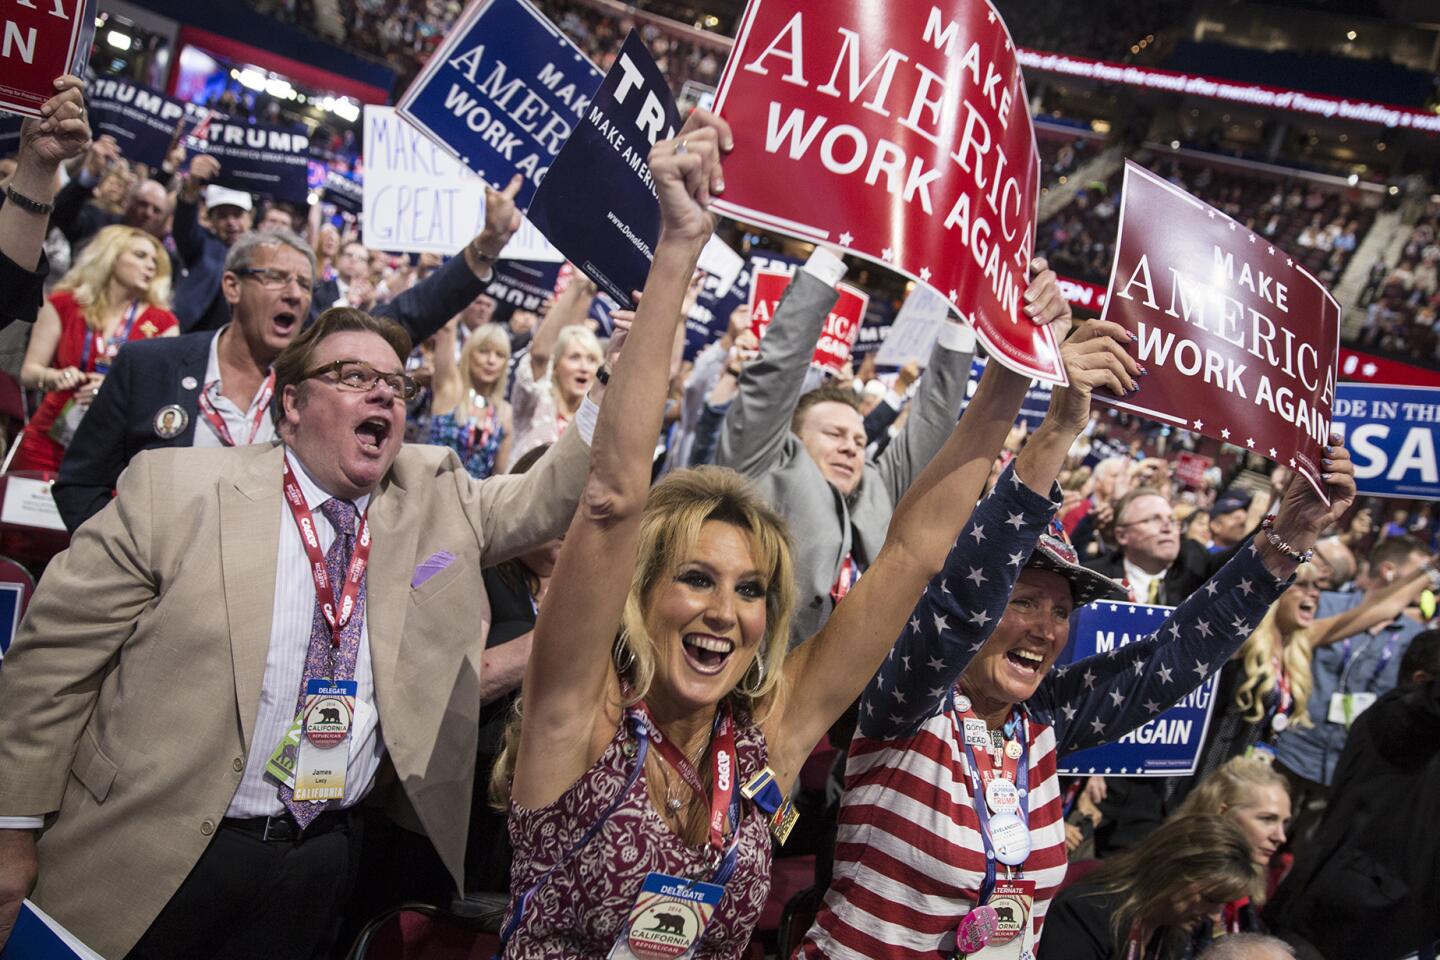 Inside the Republican National Convention